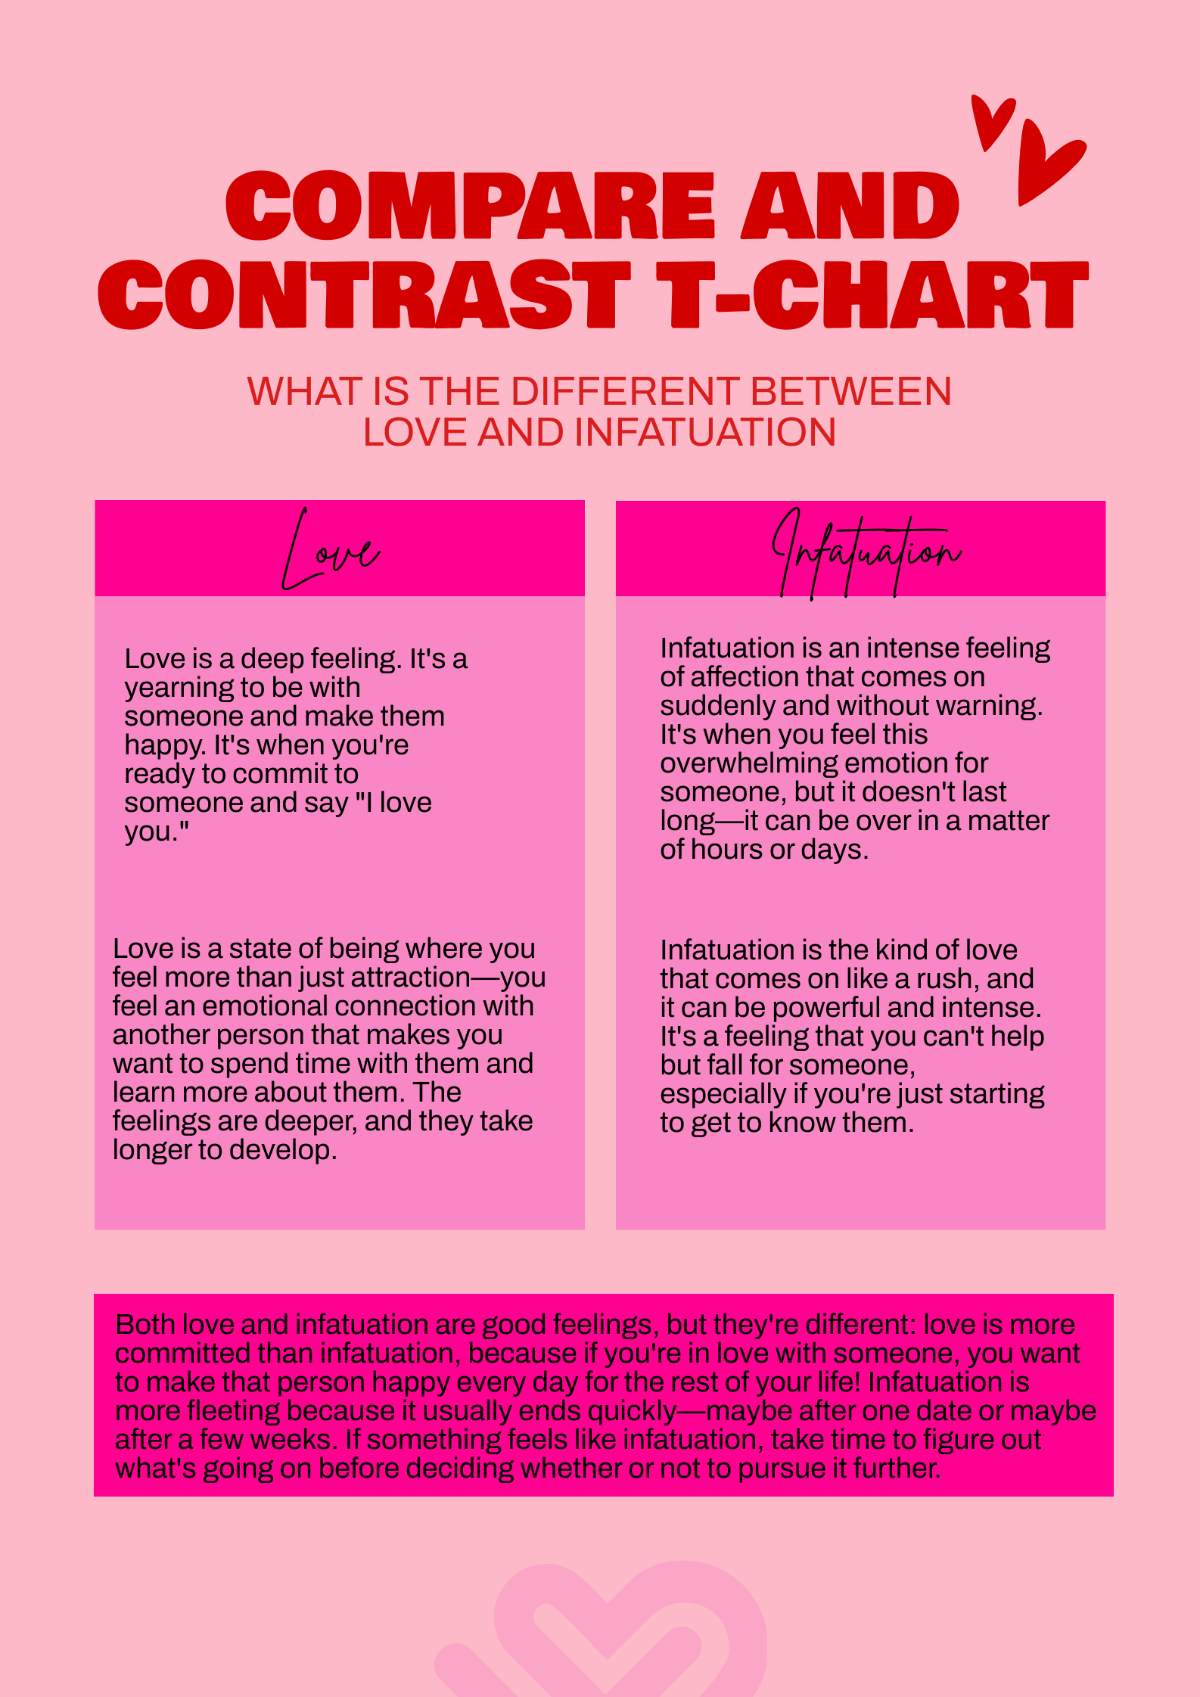 Compare and Contrast T-Chart Template